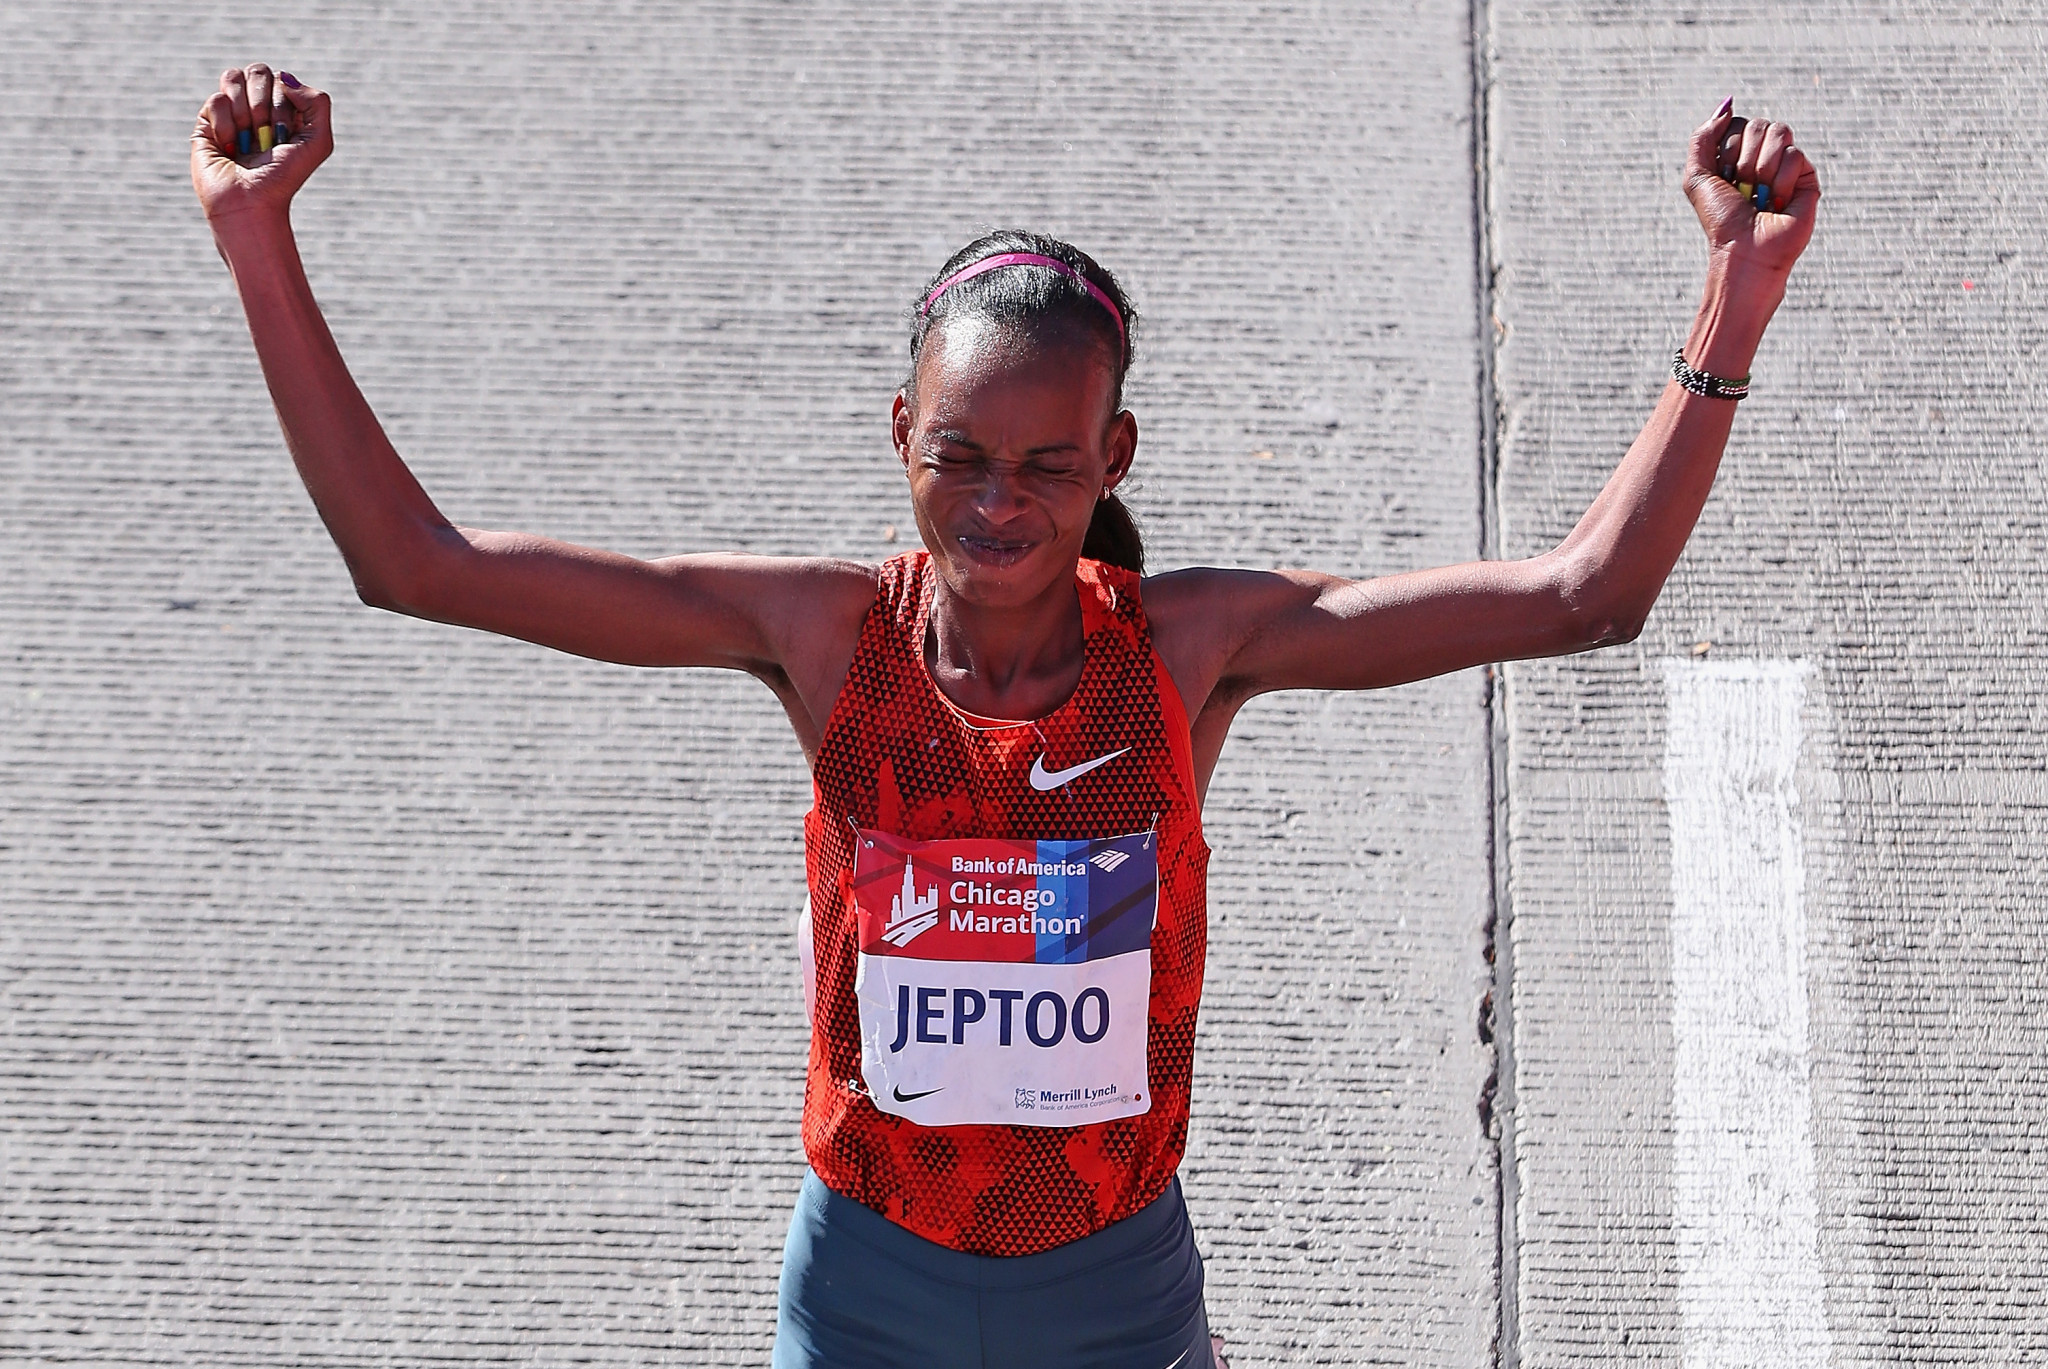 Rita Jeptoo is among other high-profile Kenyan athletes to have failed a drugs test in recent years ©Getty Images